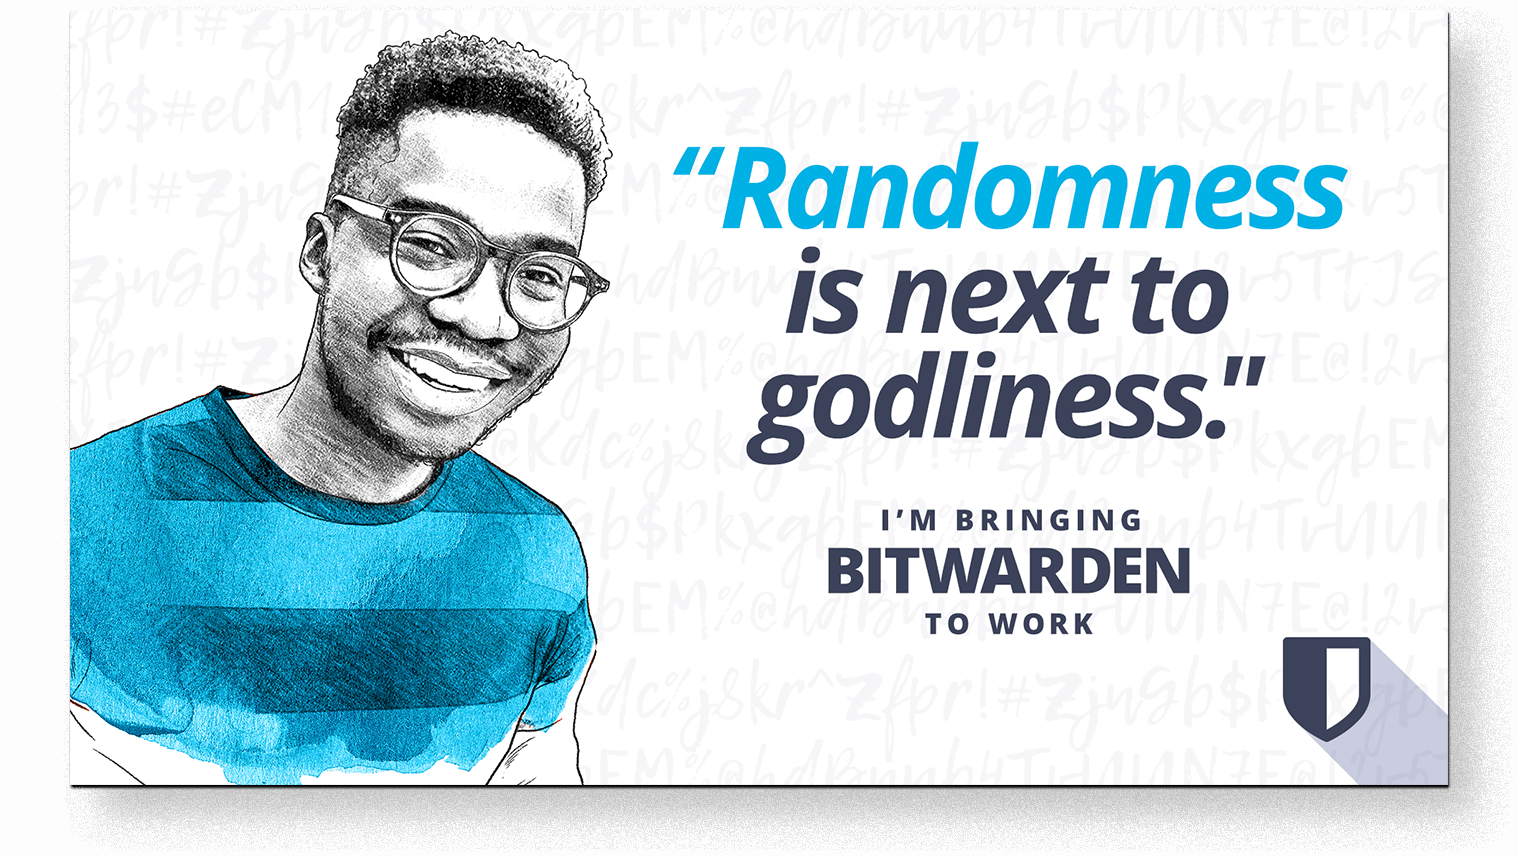 Randomness is next to godliness.